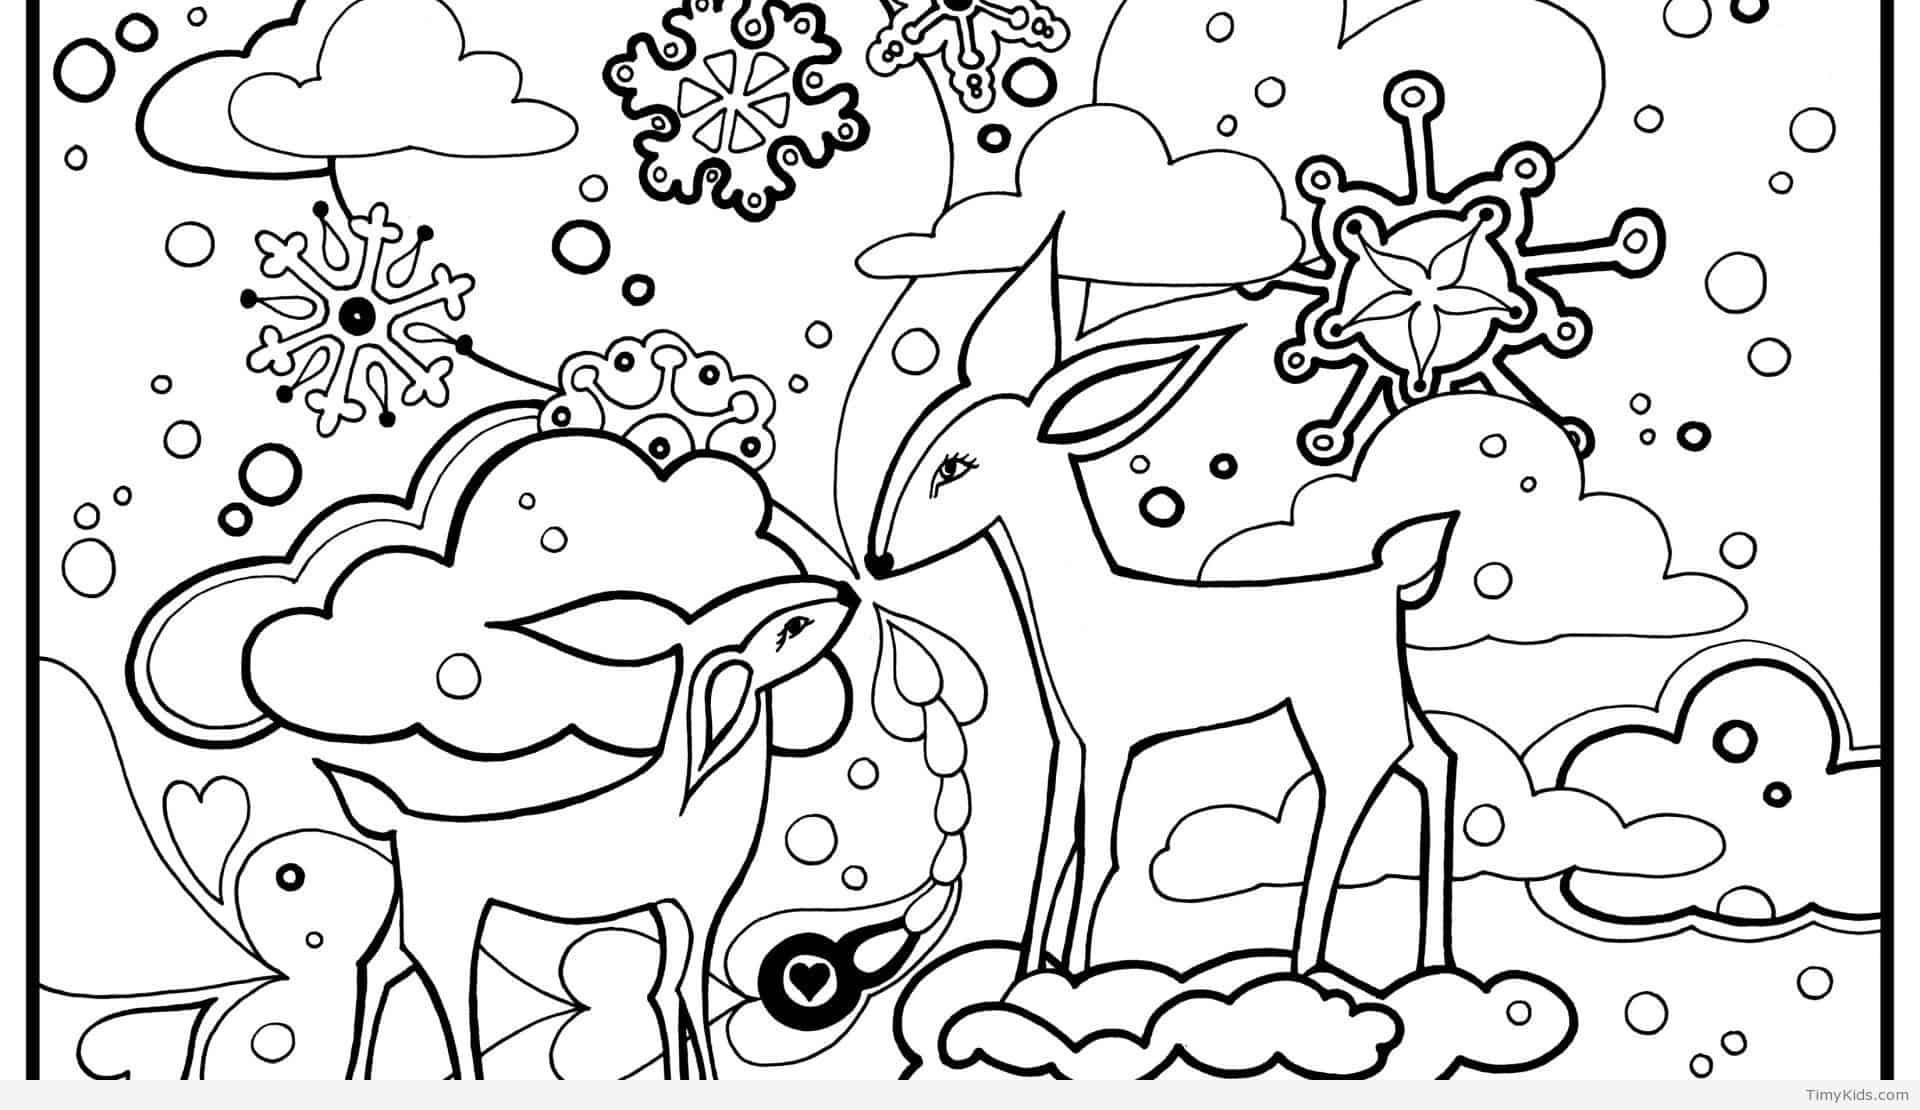 Winter Animal Coloring Pages - BubaKids.com